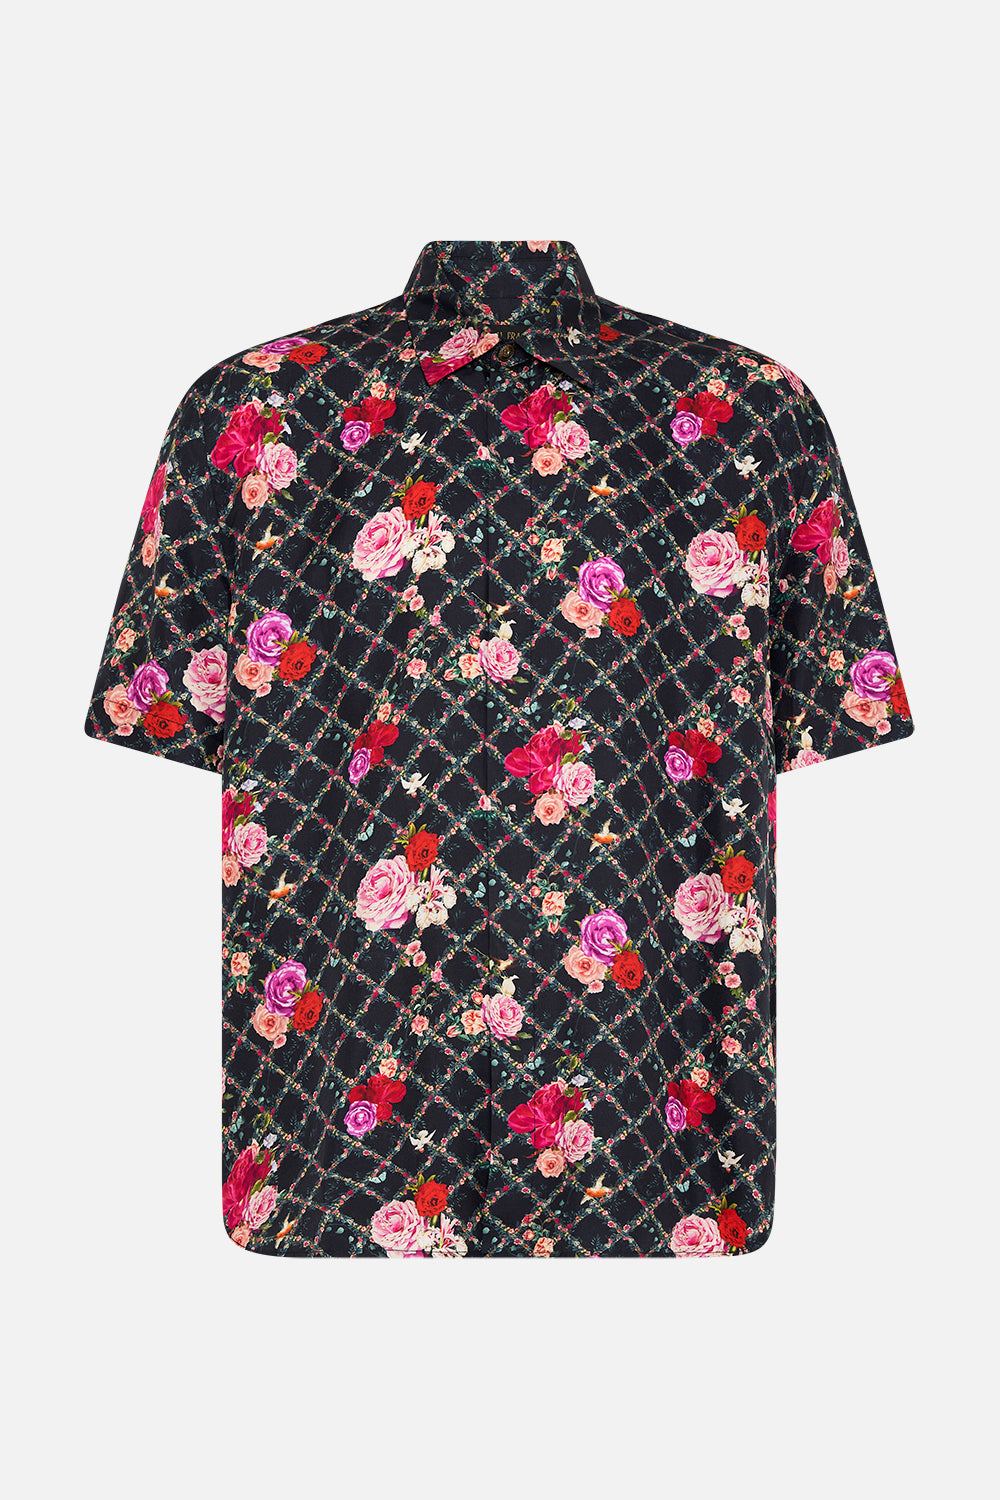 Product view of CAMILLA silk short sleeve shirt in Reservation For Love print 